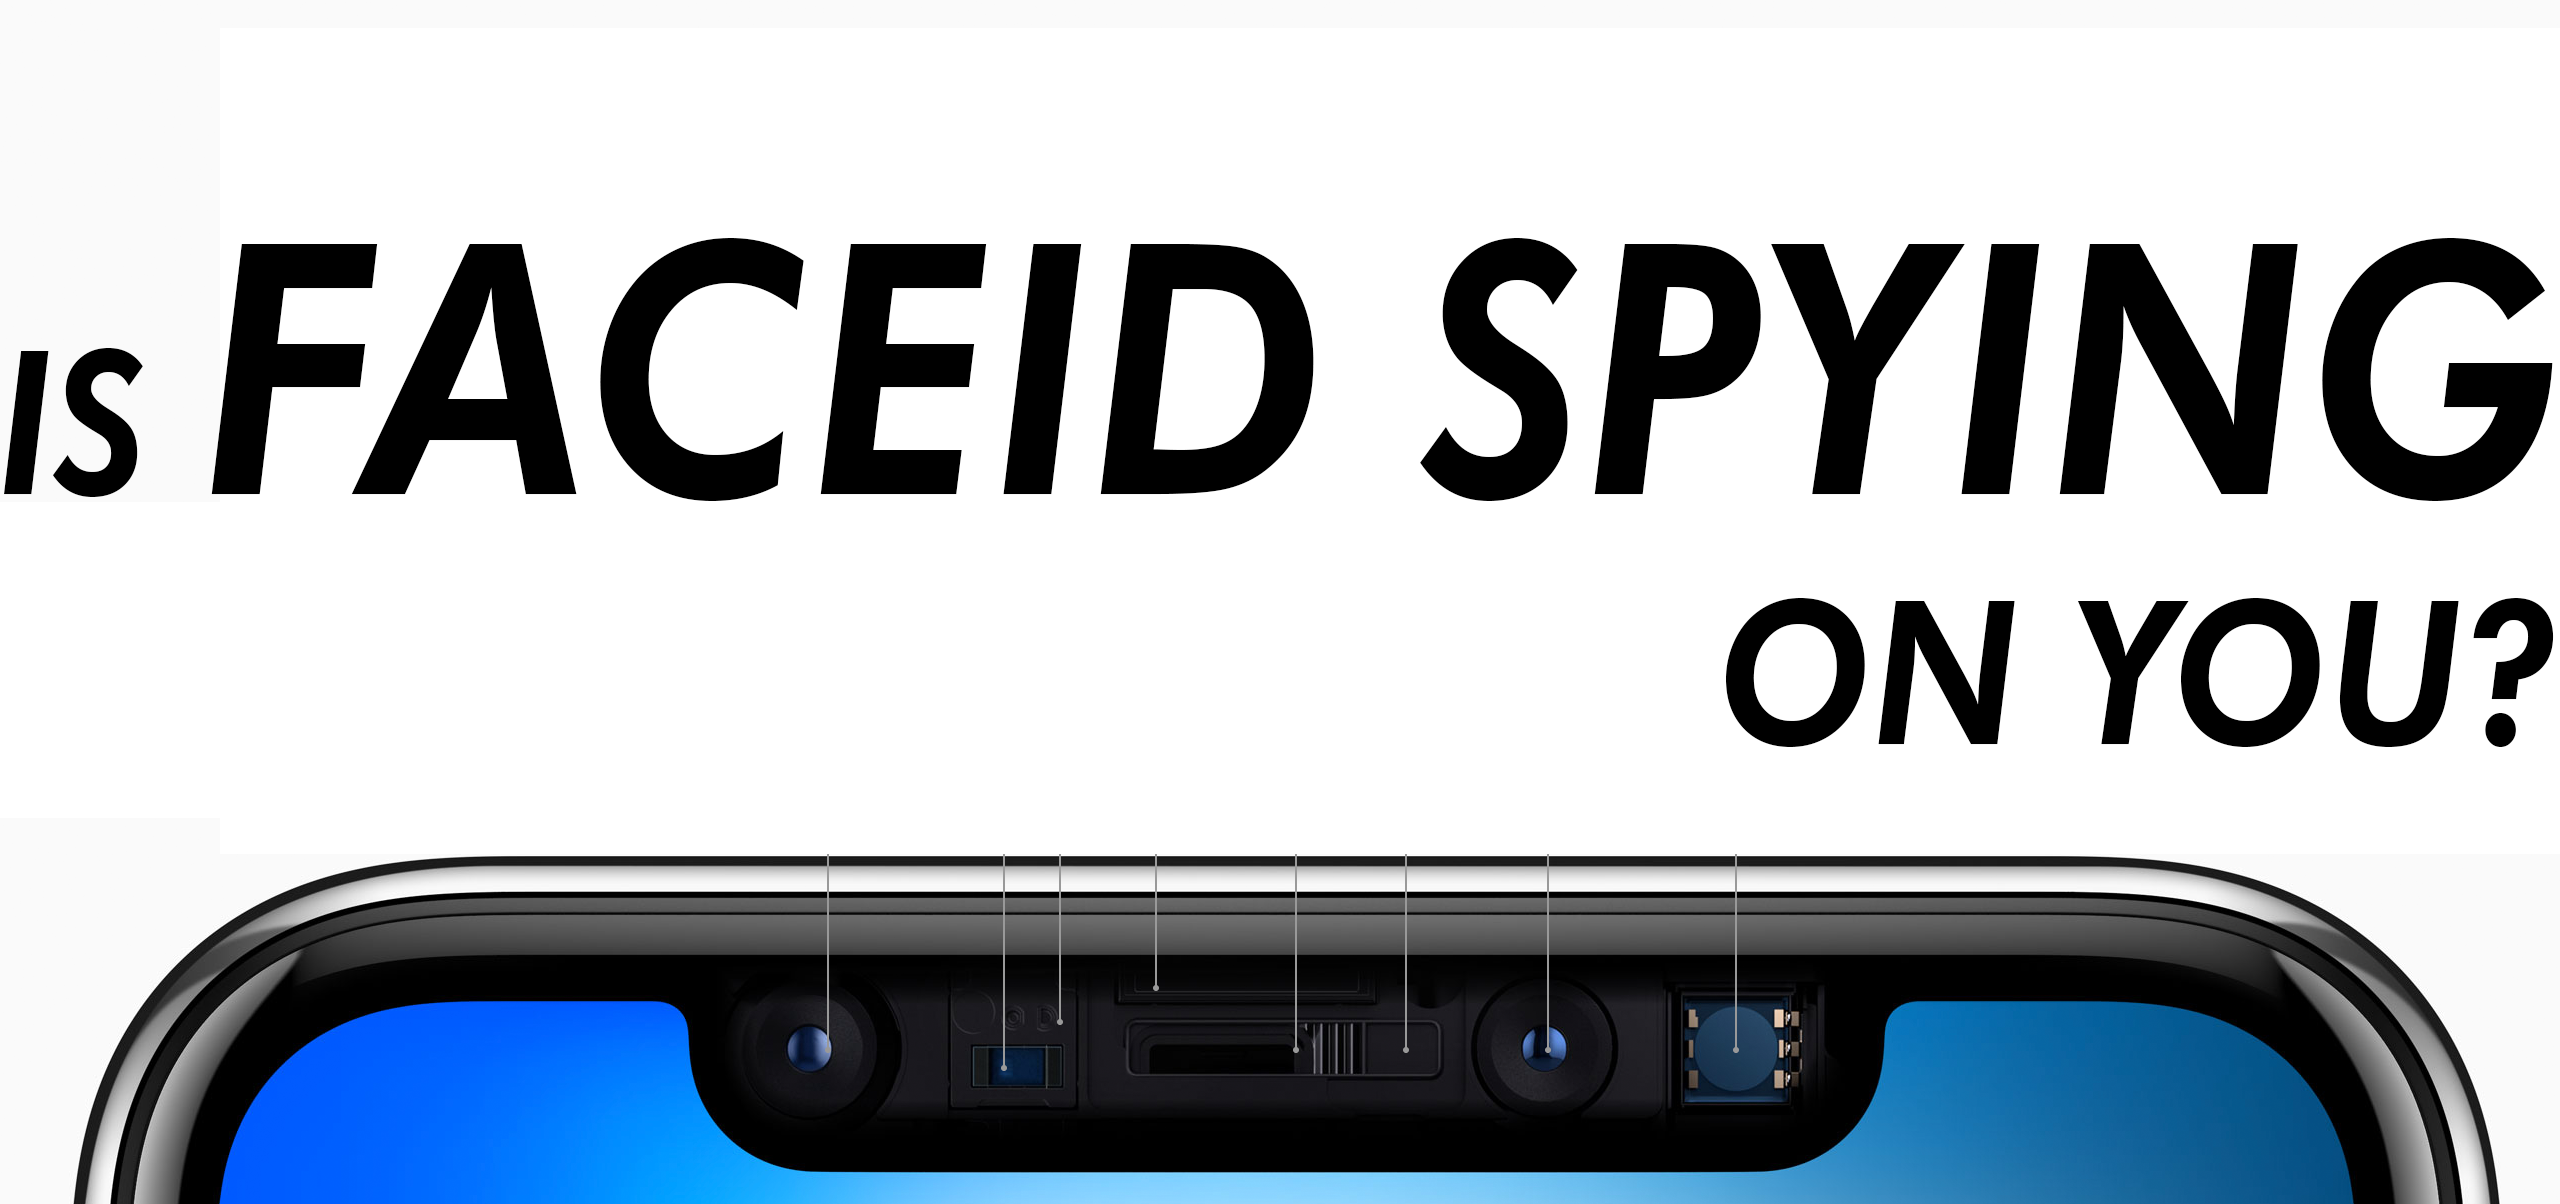 isfaceidspying.png